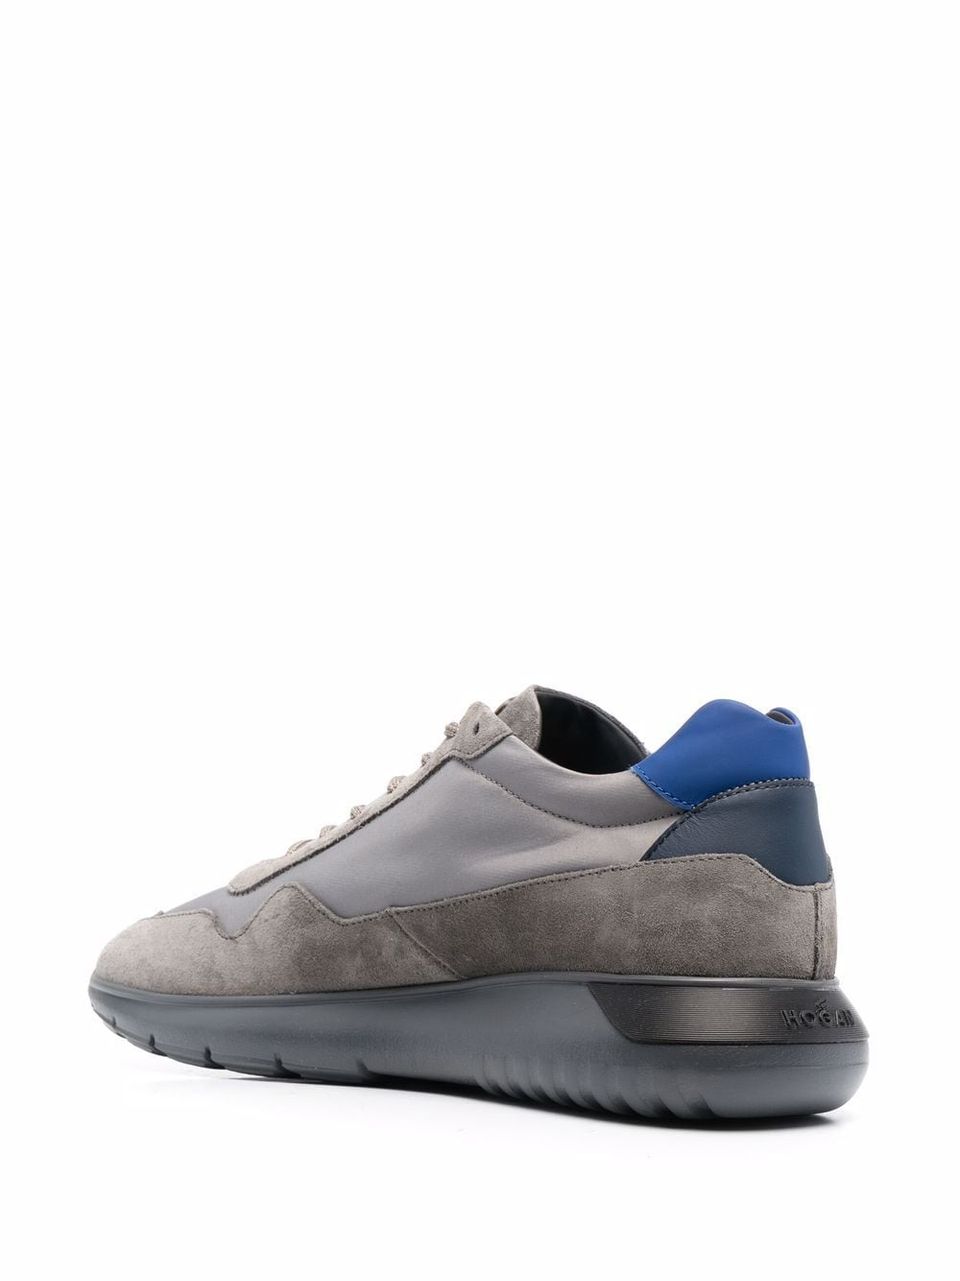 Suede leather panel sneakers